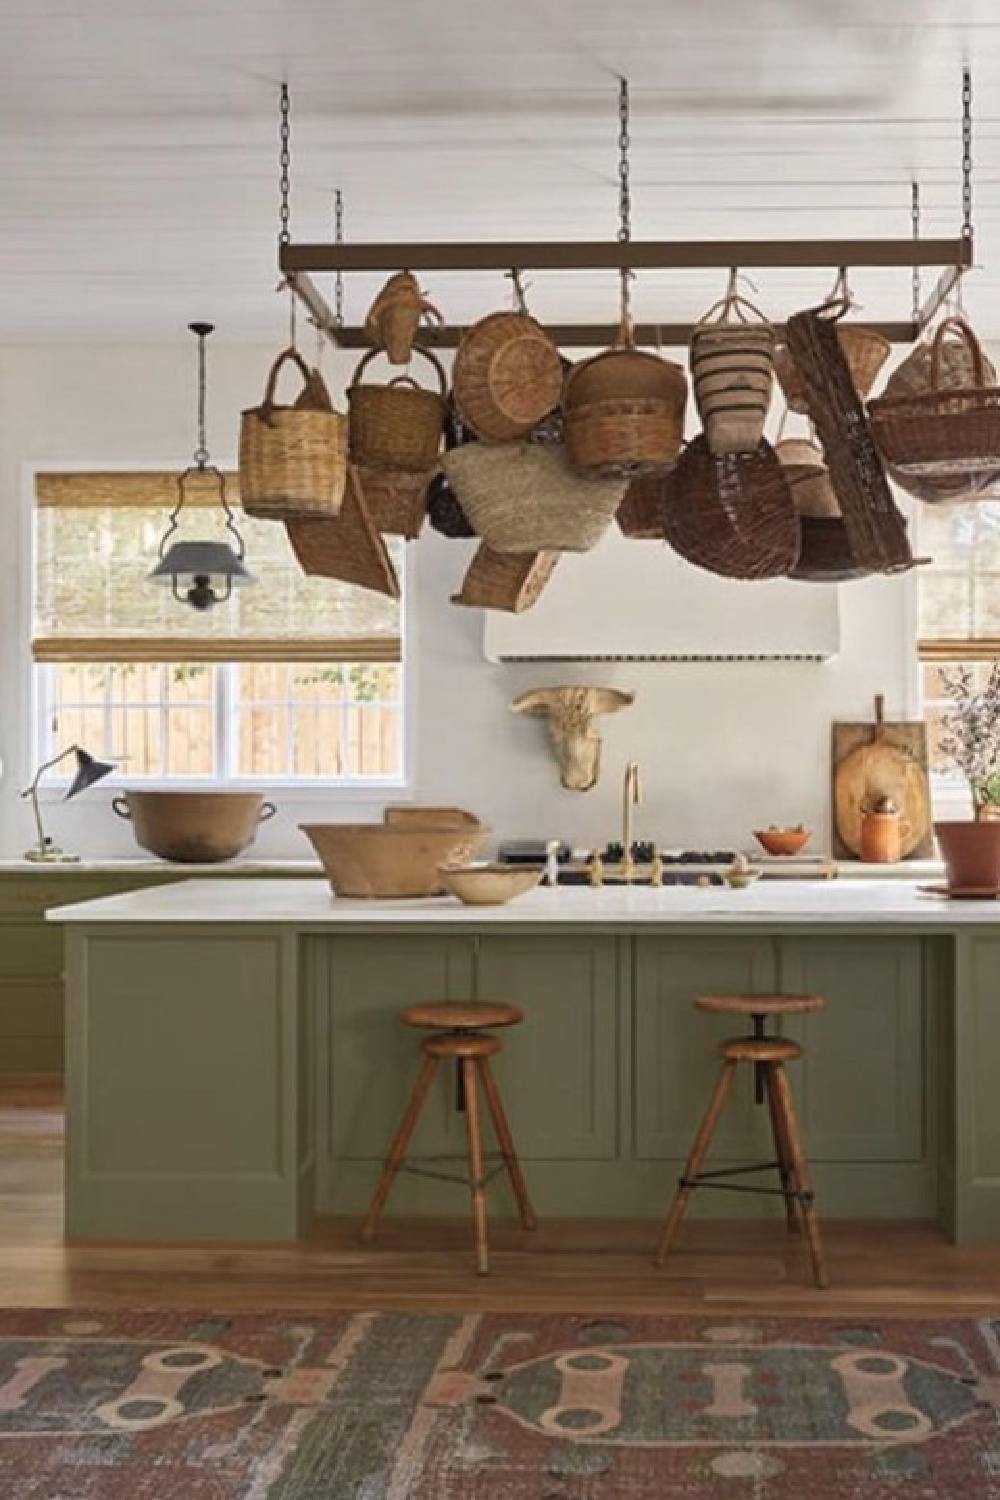 Green kitchen in Milieu Showhouse 2020. Timeless interior design by Shannon Bowers with nods to European antiques, patina, understated elegance, and sophisticated simplicity. #shannonbowers #timelessinteriors